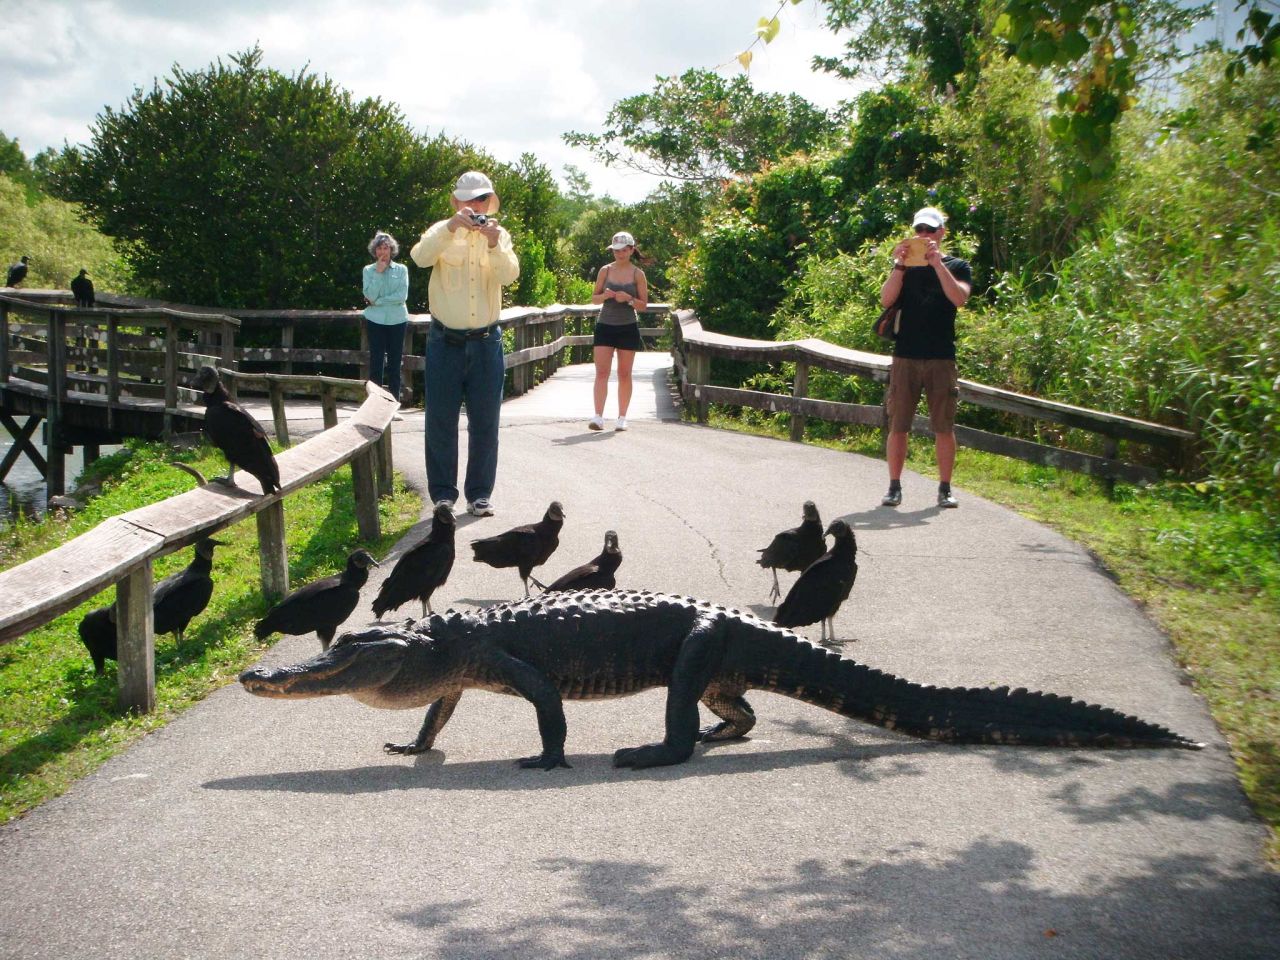 The National Park Service recommends park visitors stay at least 15 feet away from the alligators -- that's not always easy. 